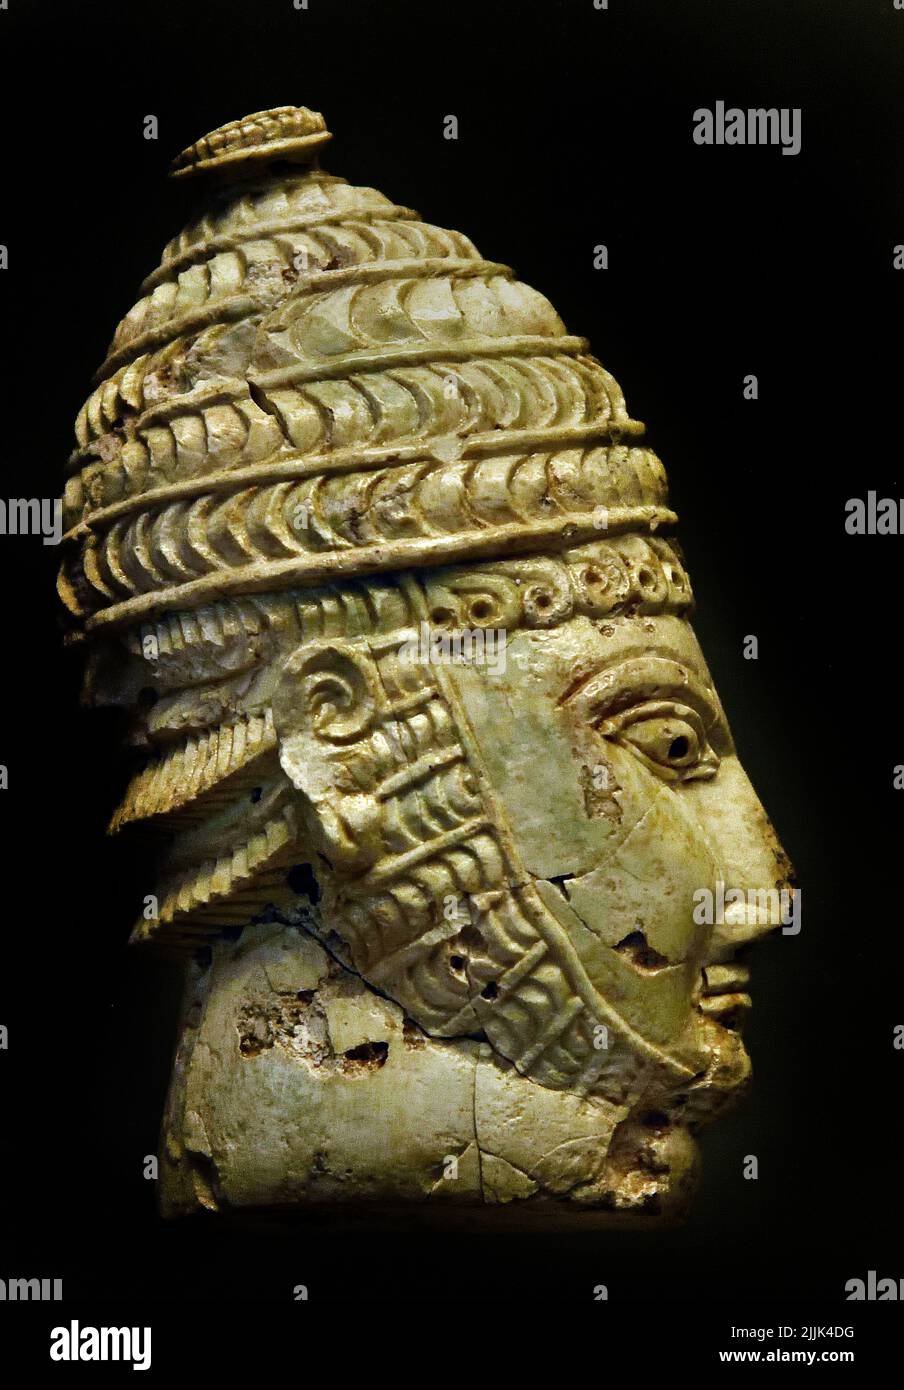 Warrior wearing a boar's tusk helmet, from a Mycenaean chamber tomb in the Acropolis of Athens, 14th–13th century BC. Mycenaean Greece , Mycenaean civilization, Bronze Age in Ancient Greece 1750 to 1050 BC, Mycenae, National Archaeological Museum in Athens. Stock Photo